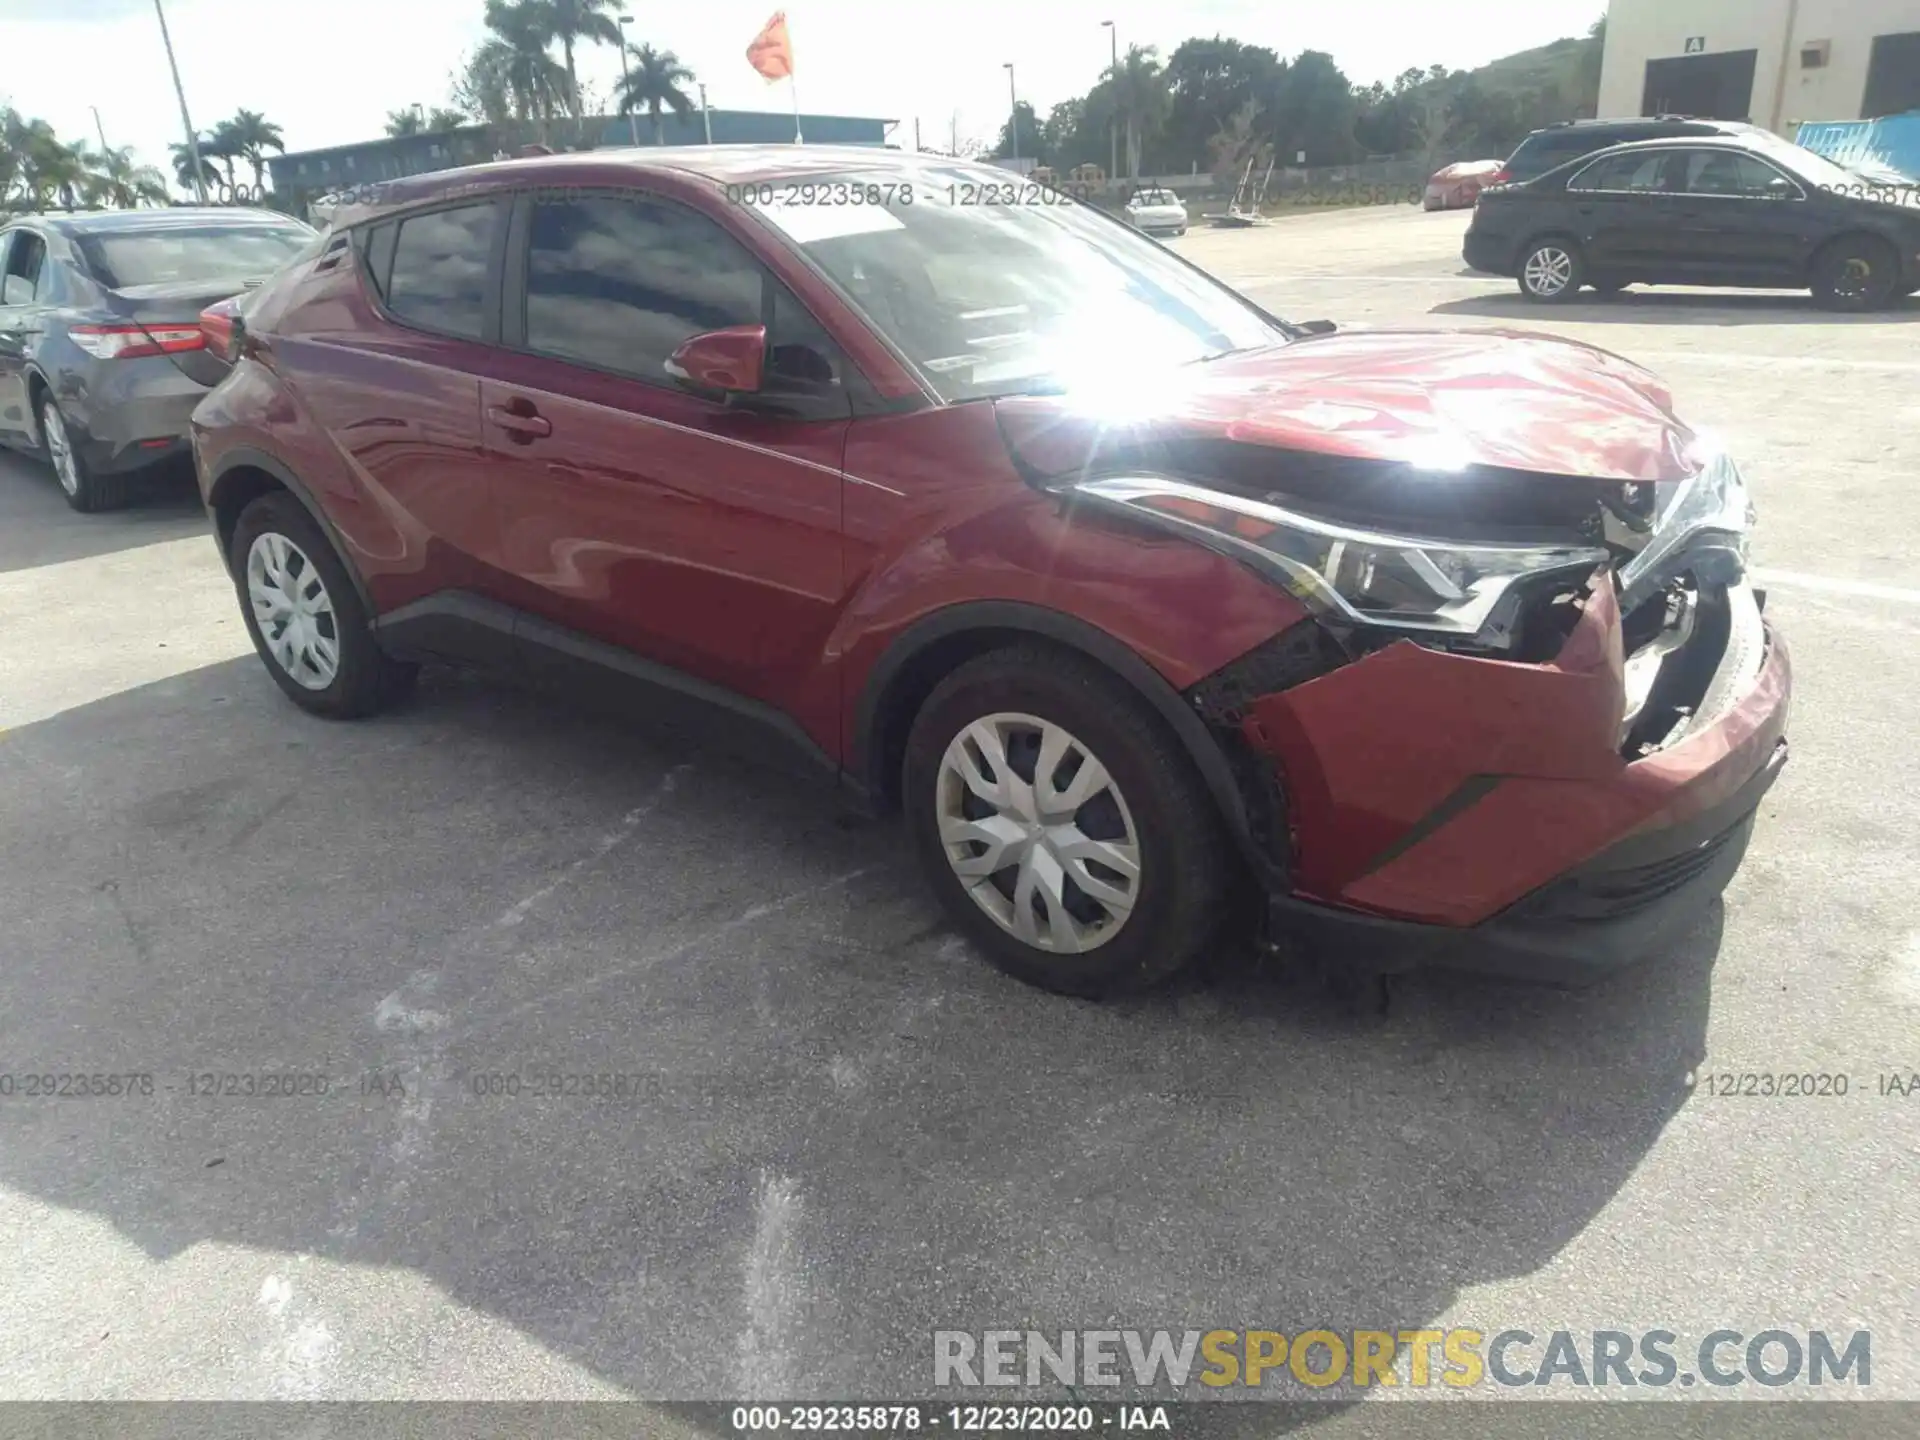 1 Photograph of a damaged car NMTKHMBXXKR087732 TOYOTA C-HR 2019